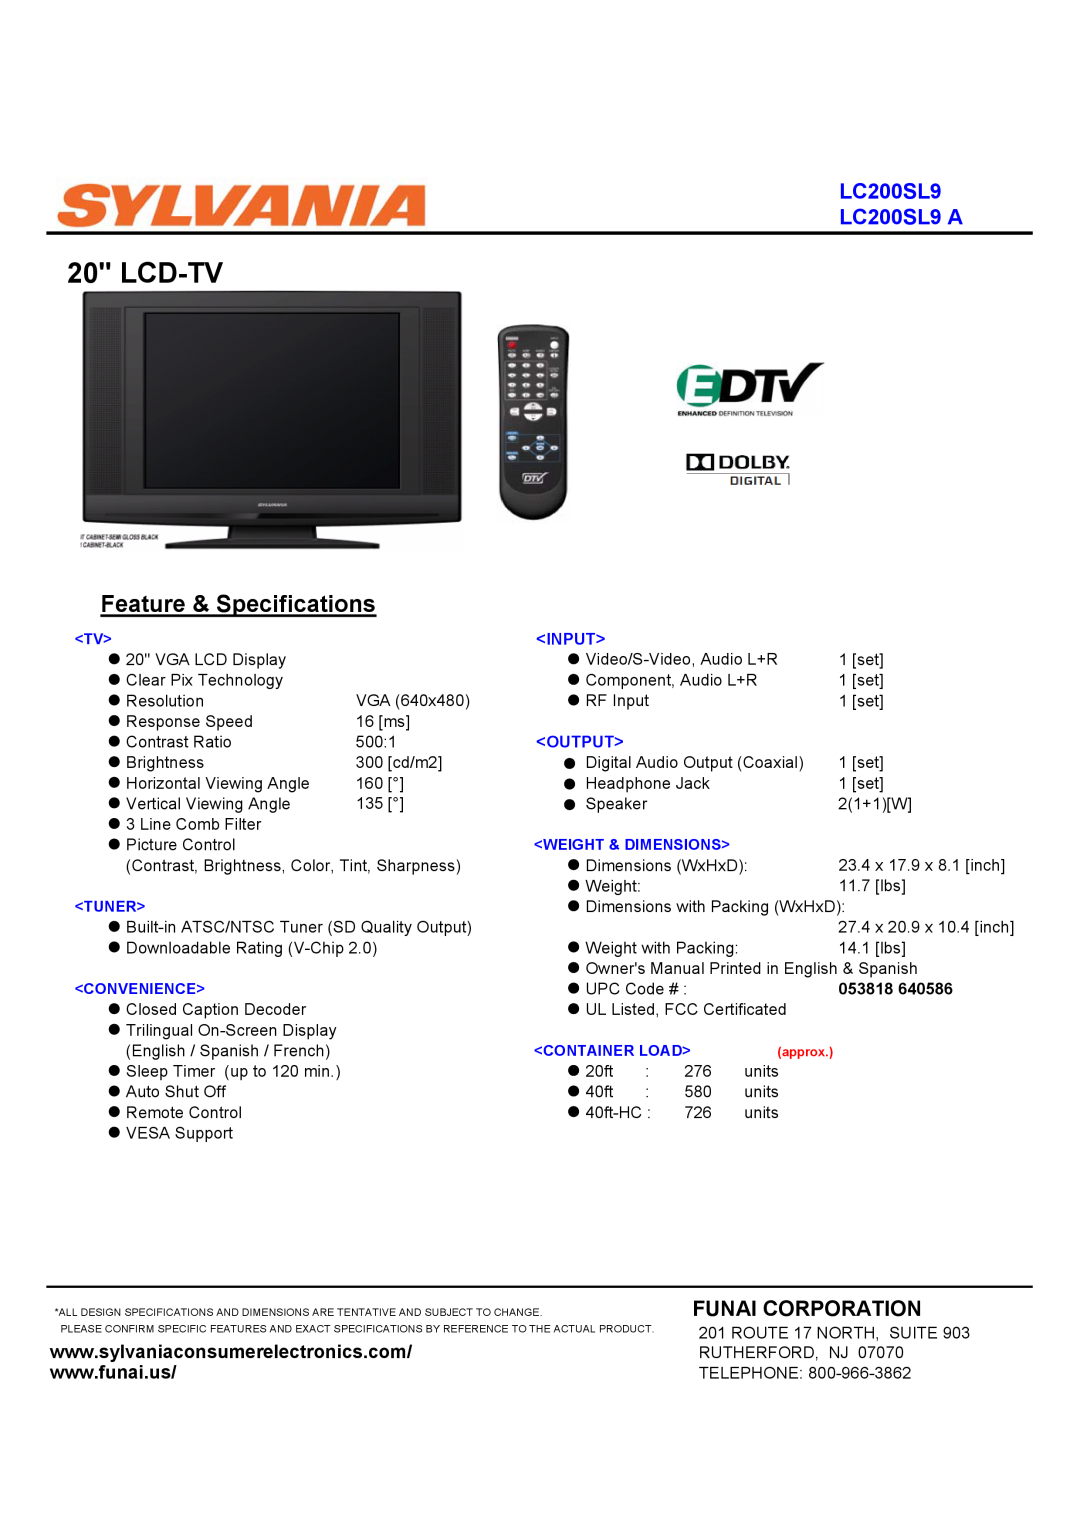 FUNAI specifications Lcd-Tv, Feature & Specifications, LC200SL9 LC200SL9 A, Funai Corporation, Input, Output, 053818 